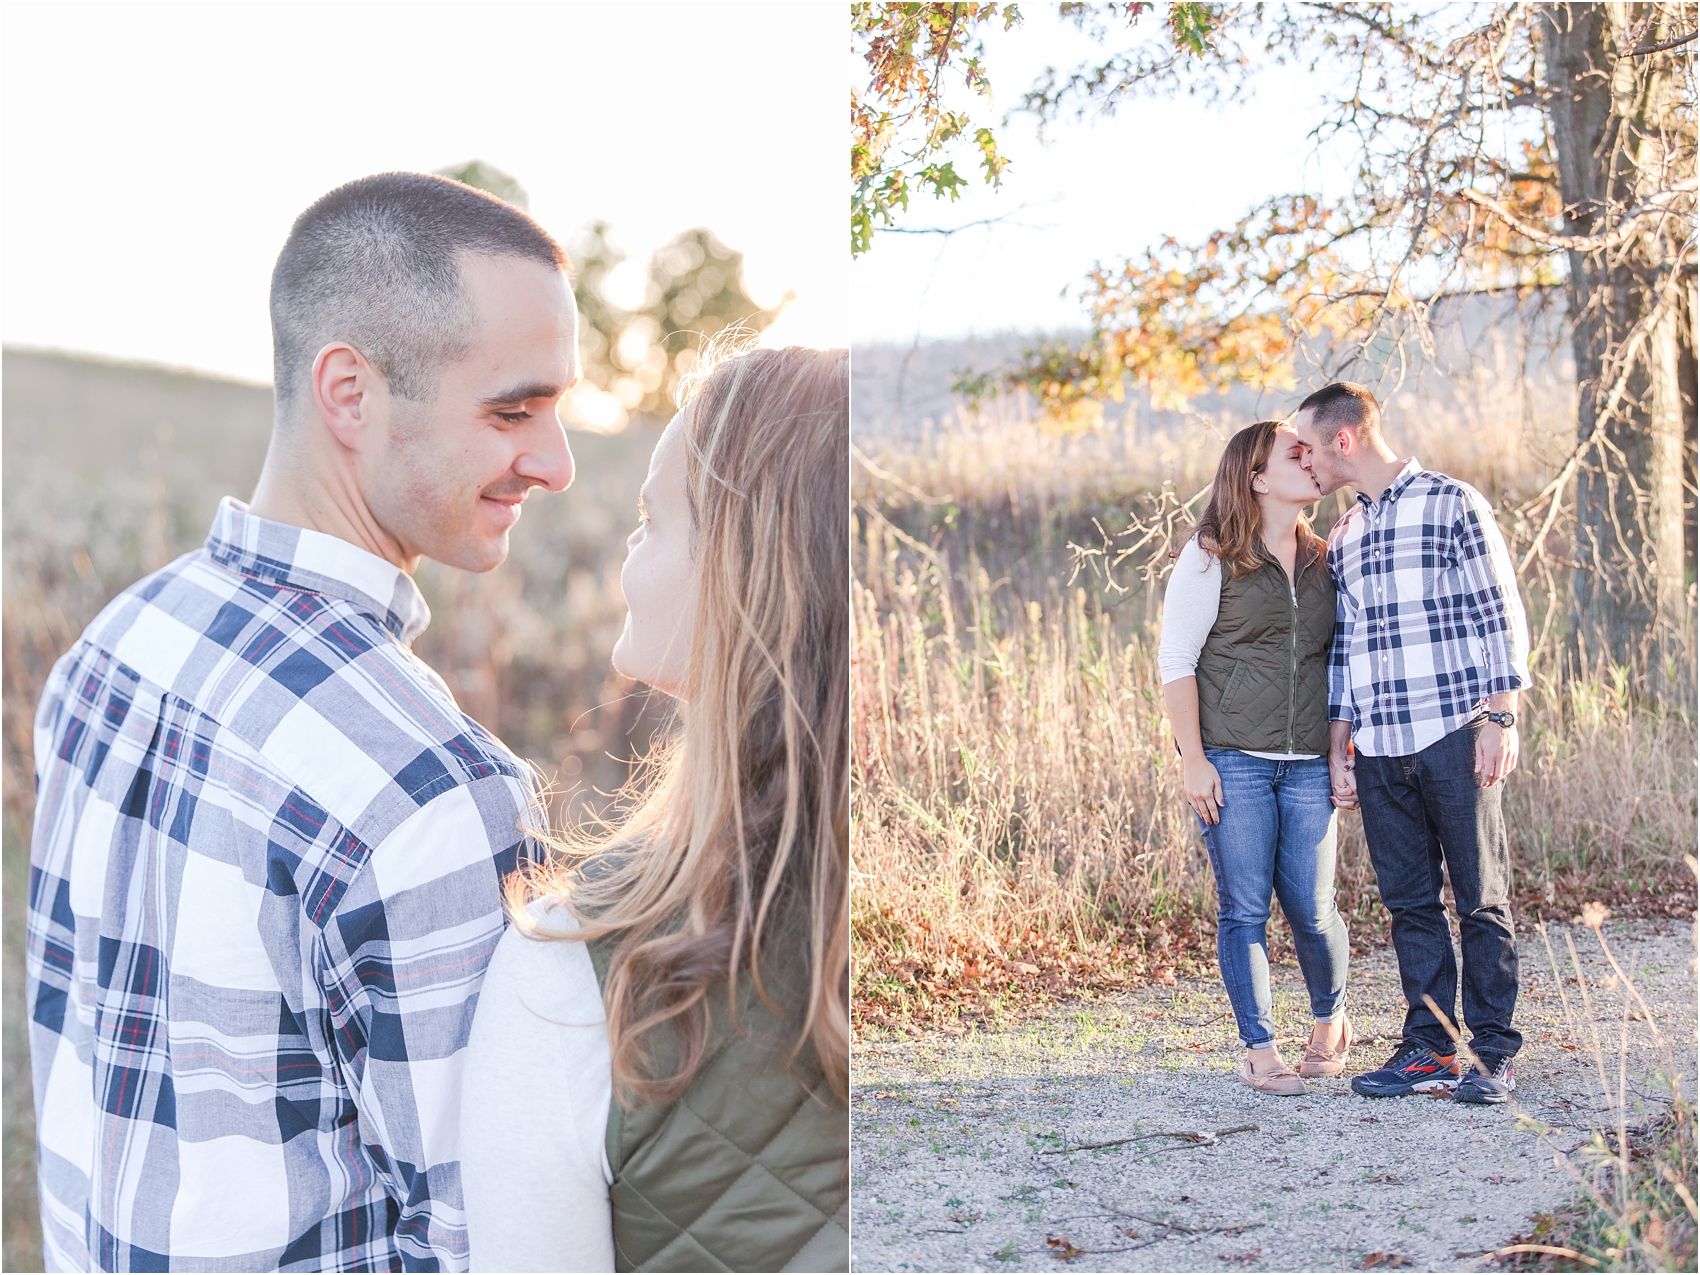 romantic-fall-engagement-photos-at-indian-springs-metropark-in-clarkston-mi-by-courtney-carolyn-photography_0010.jpg